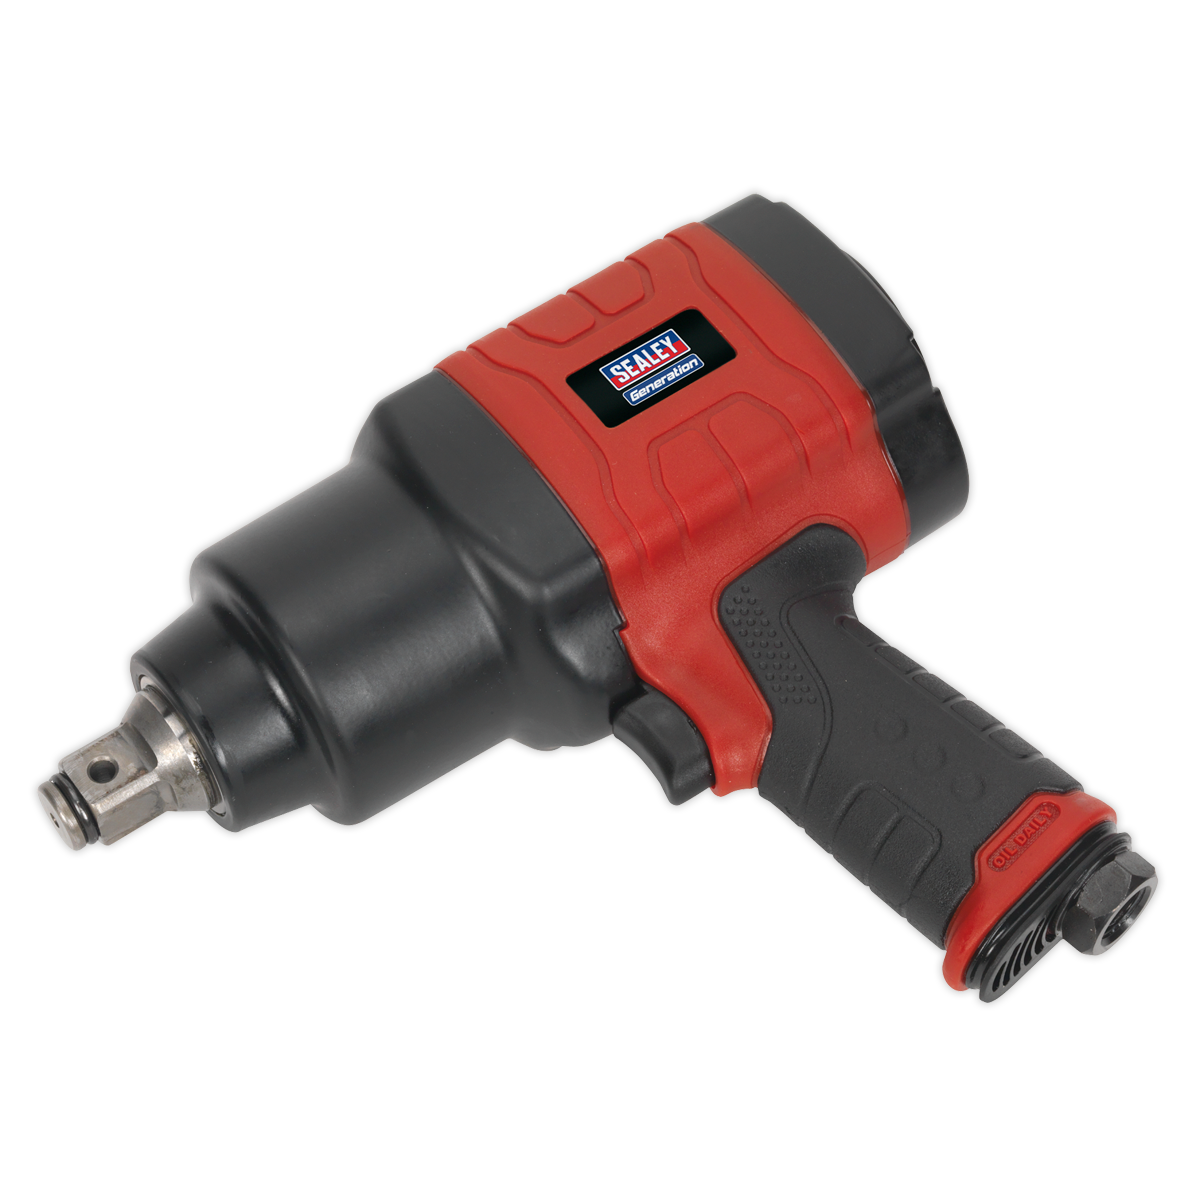 Composite Air Impact Wrench 3/4"Sq Drive - Twin Hammer